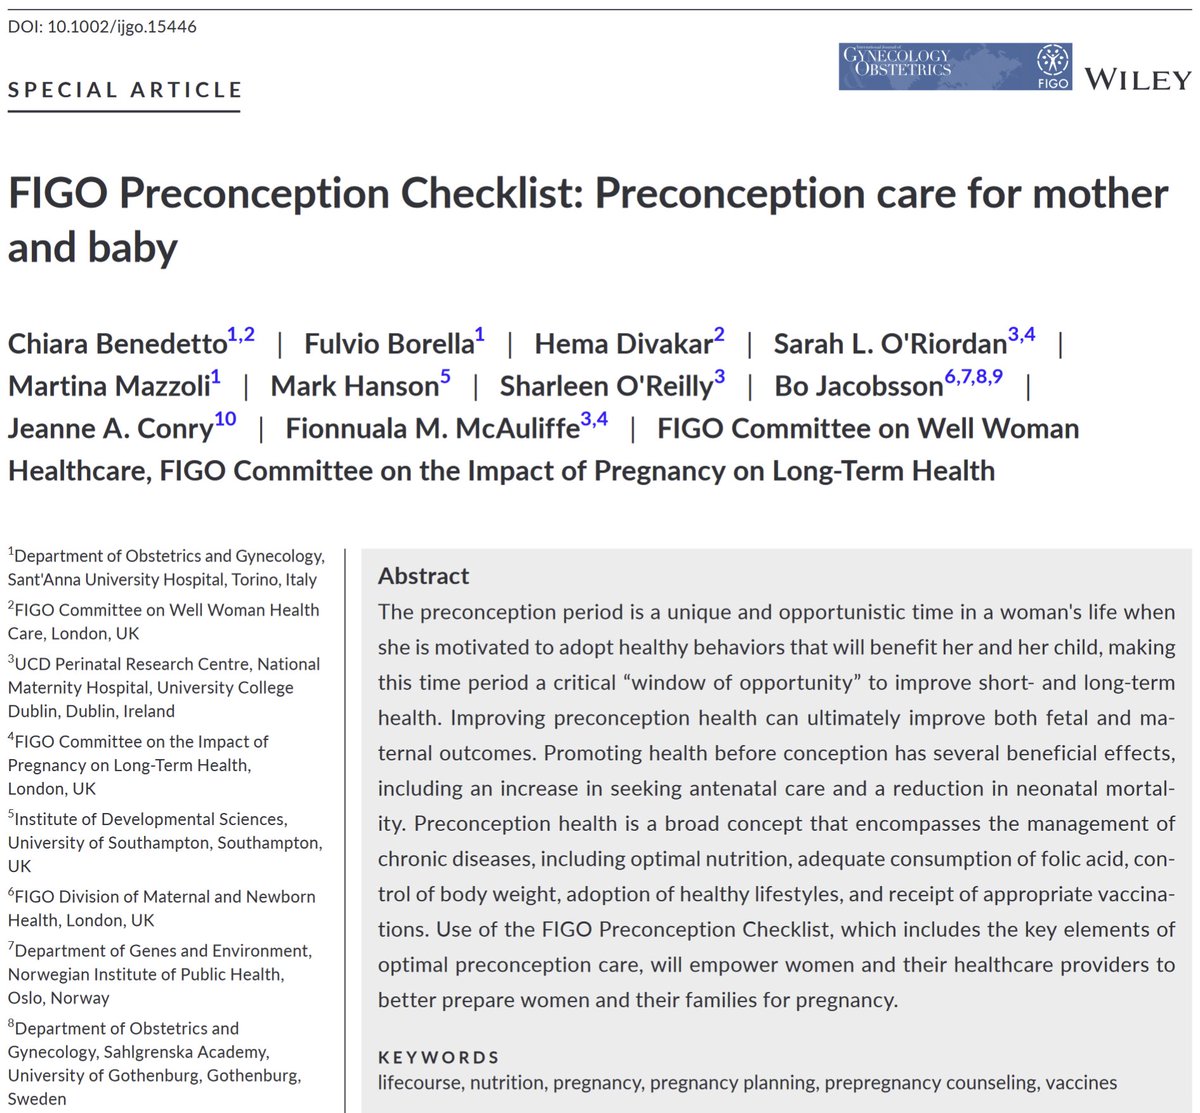 FIGO launch their 'Preconception Checklist' setting out key elements of optimal preconception care for mother & baby. Our NiPPeR trial findings indicate the need for new research & the likely lasting benefits of preconception care pubmed.ncbi.nlm.nih.gov/38287349/ doi.org/10.1002/ijgo.1…